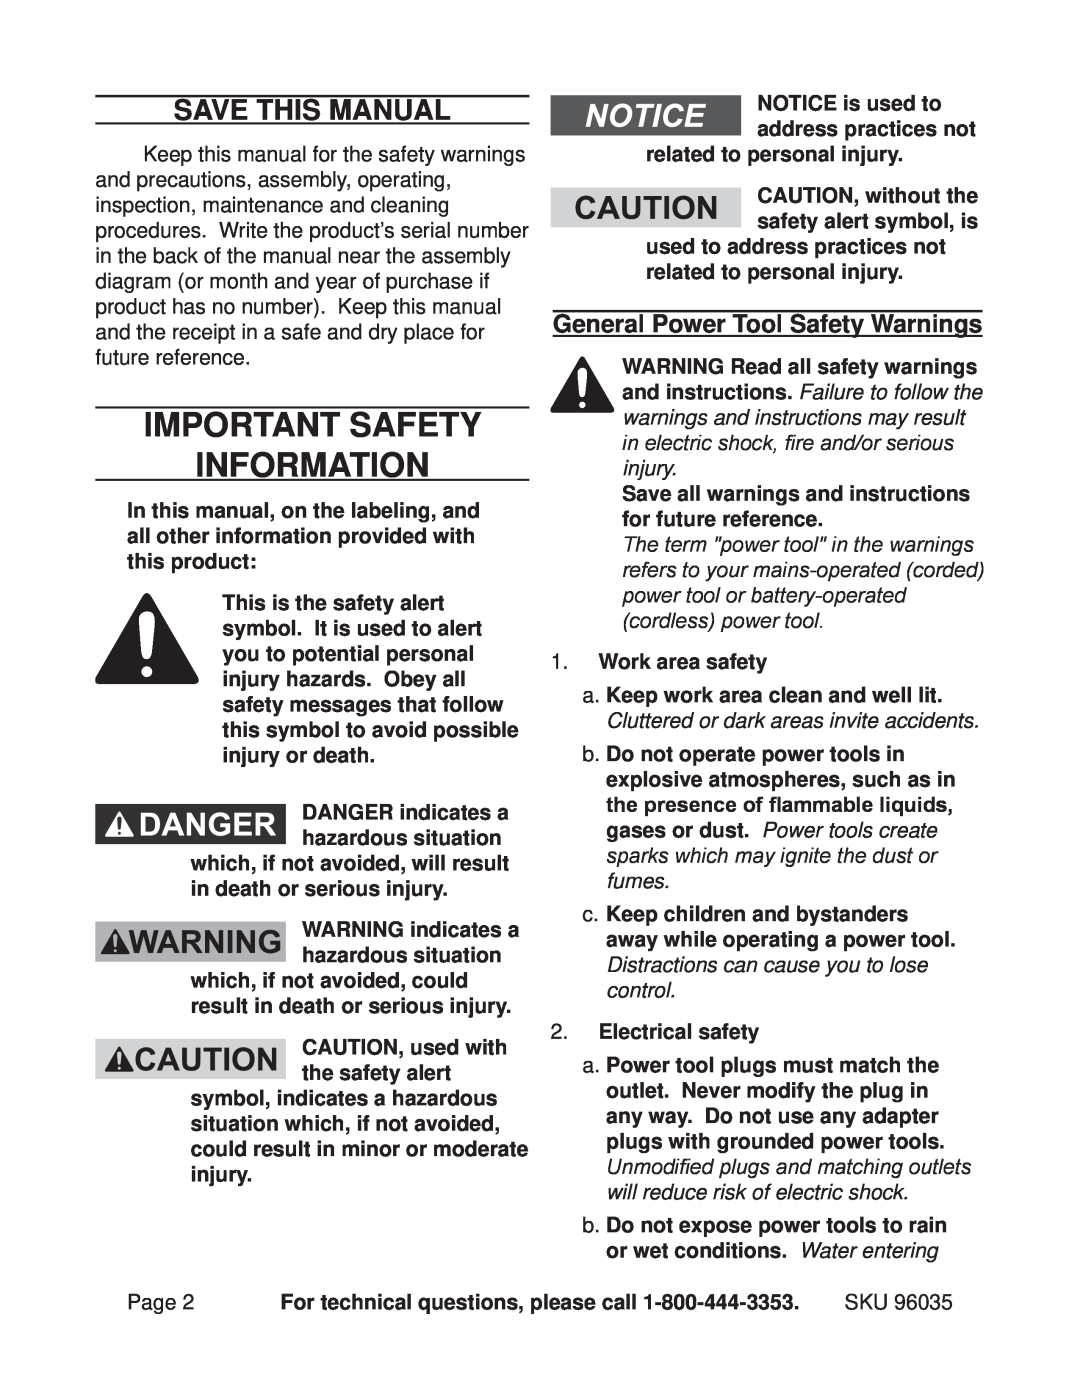 Chicago Electric 96035 Important SAFETY Information, Save This Manual, General Power Tool Safety Warnings 